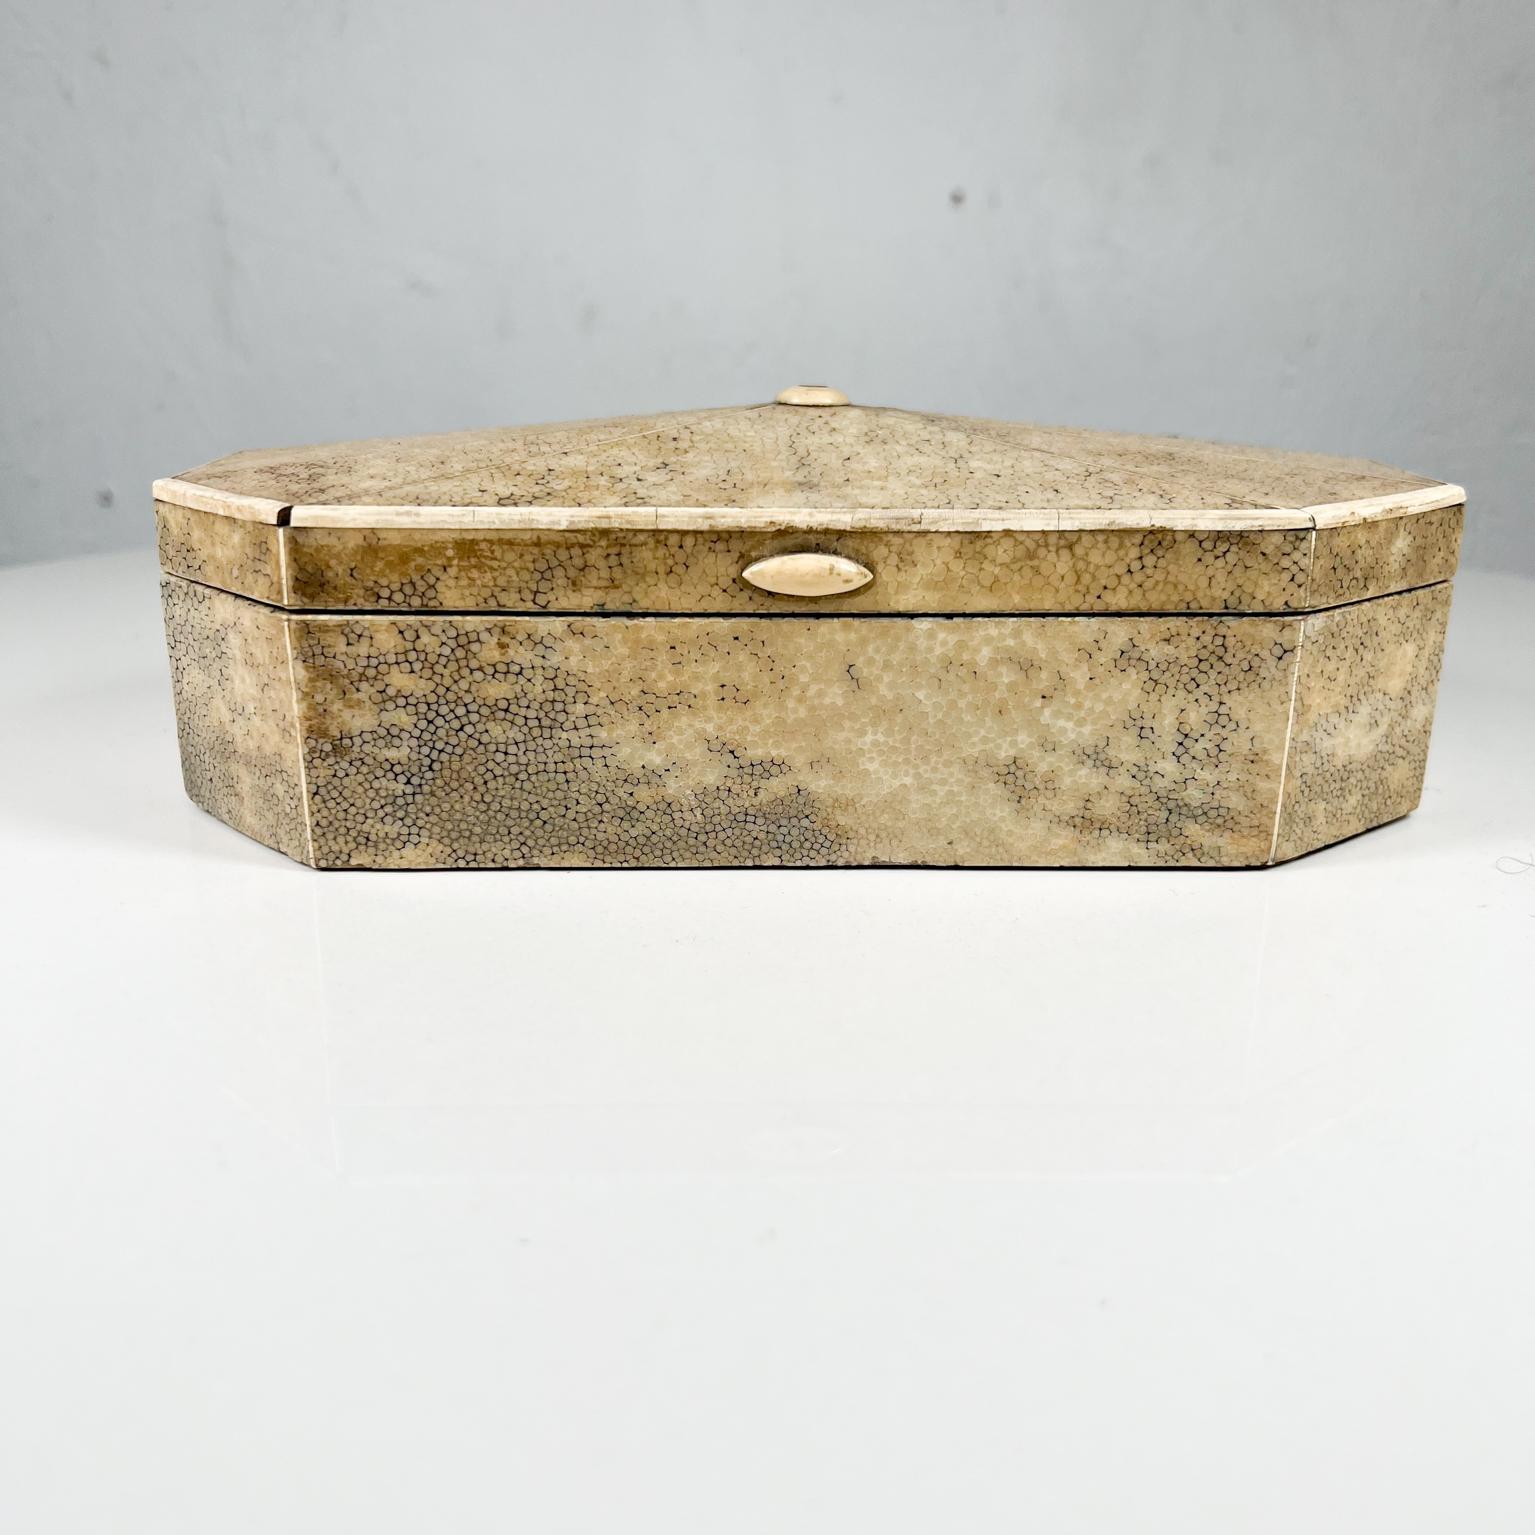 1930s Art Deco Shagreen Trinket Keepsake Box Leather Wood In Good Condition For Sale In Chula Vista, CA